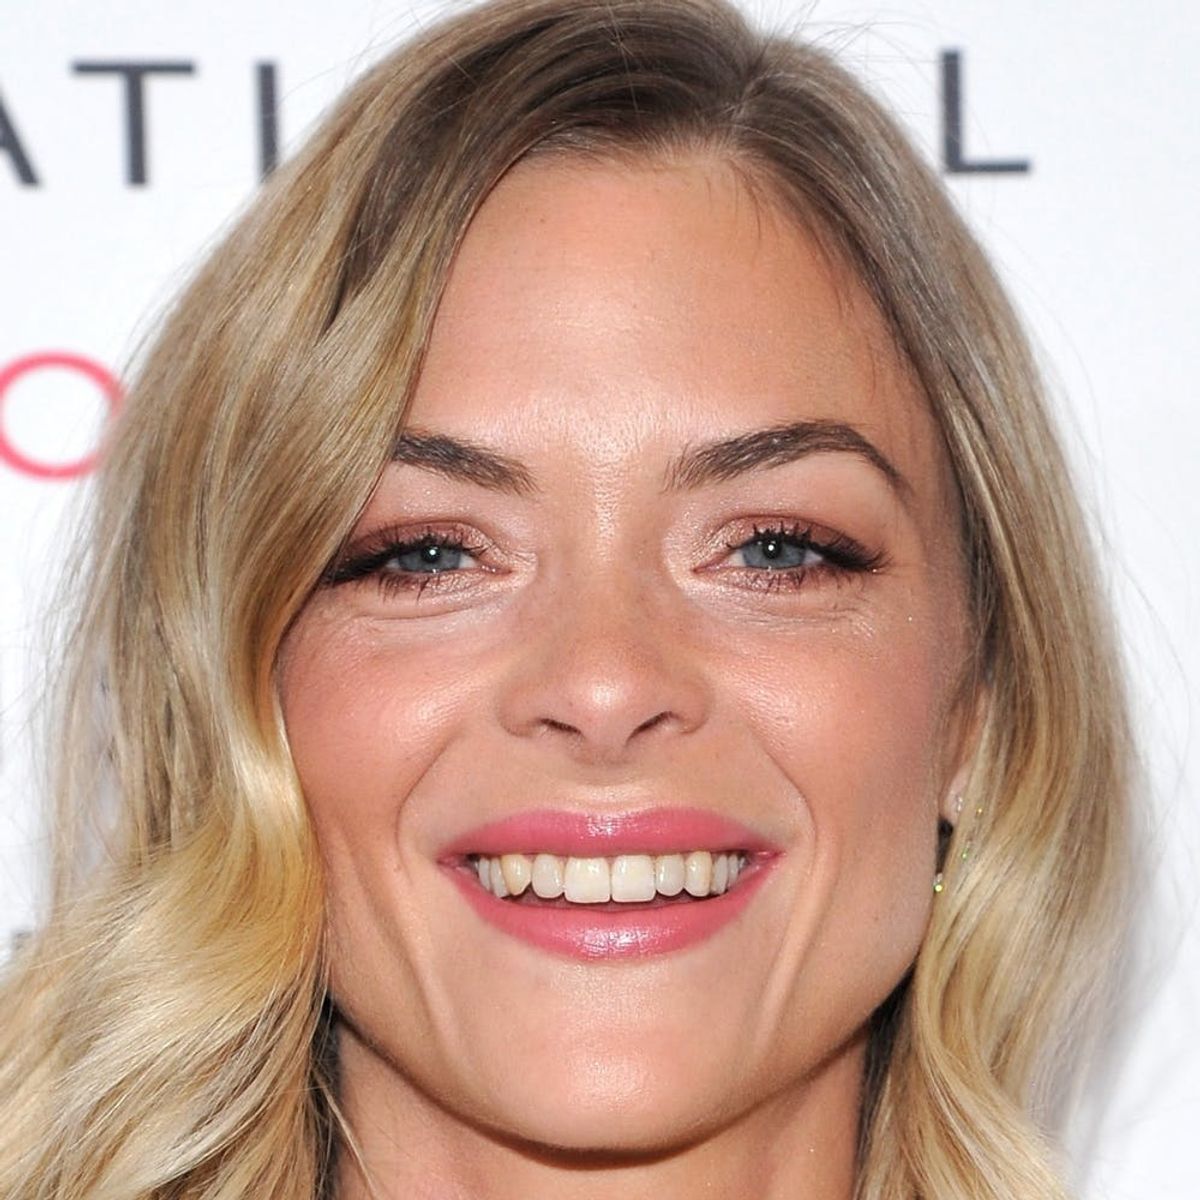 Jaime King’s New Fall Hairdo Will Give You a *Serious* Case of Bang Envy